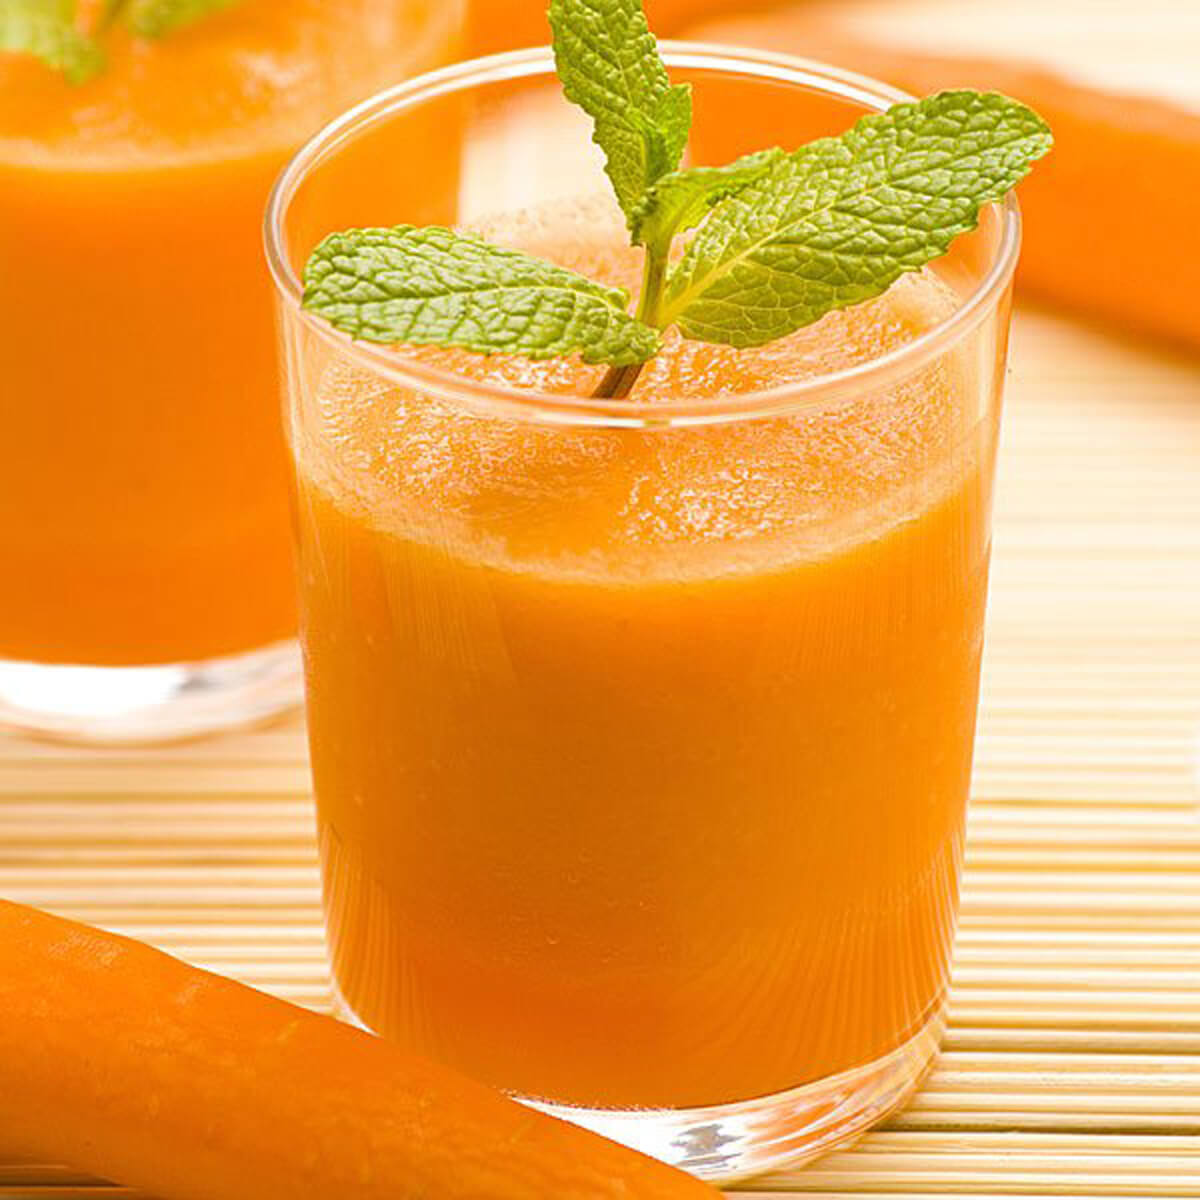 Carrot and mint juice for a sore throat